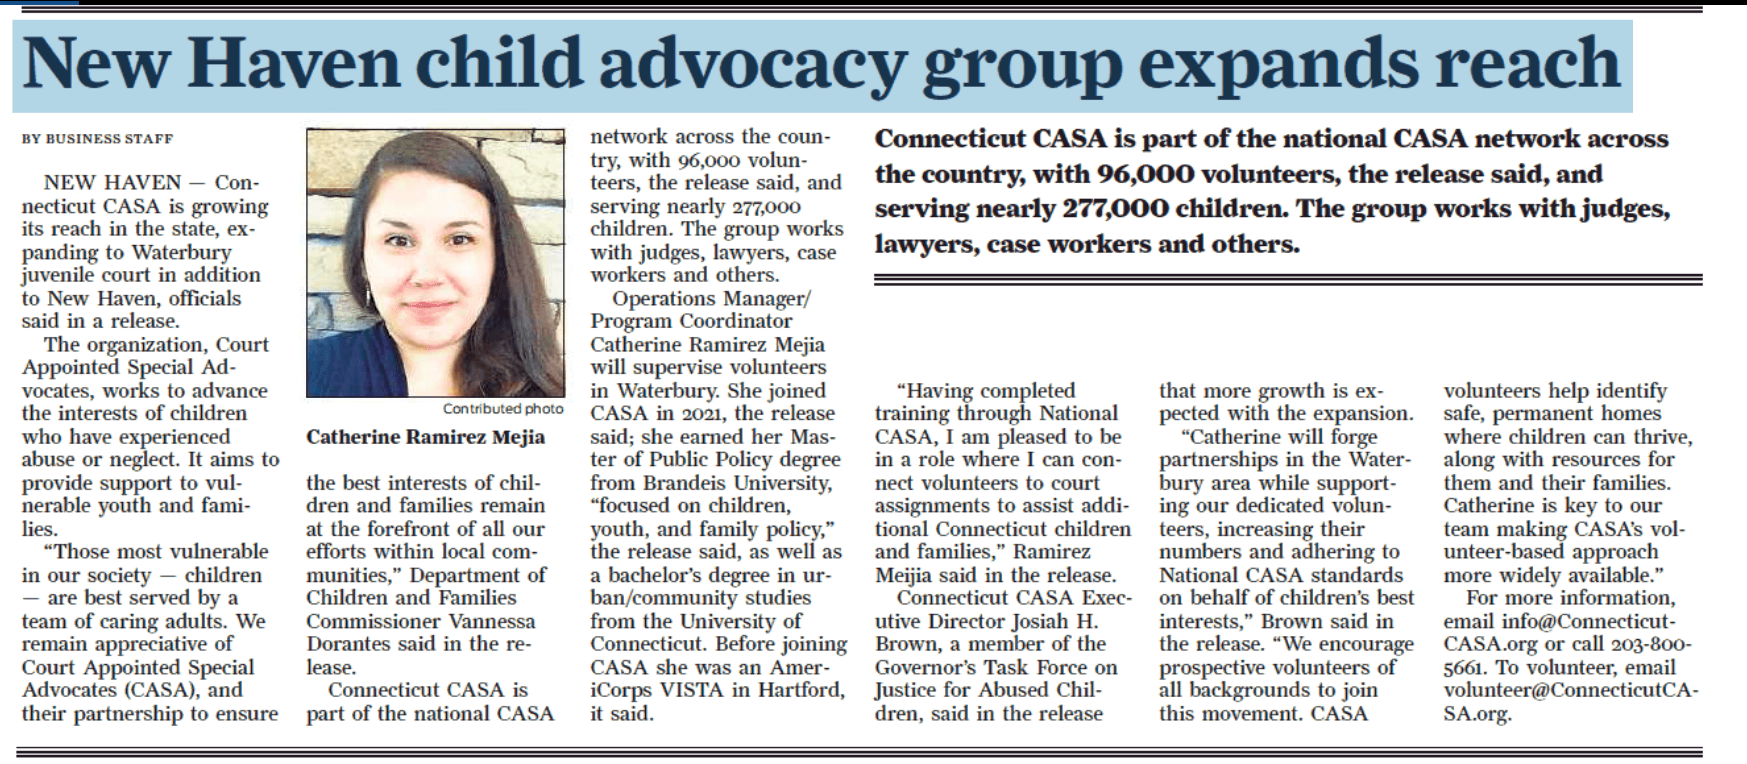 "CT child advocacy group CASA expands to Waterbury"